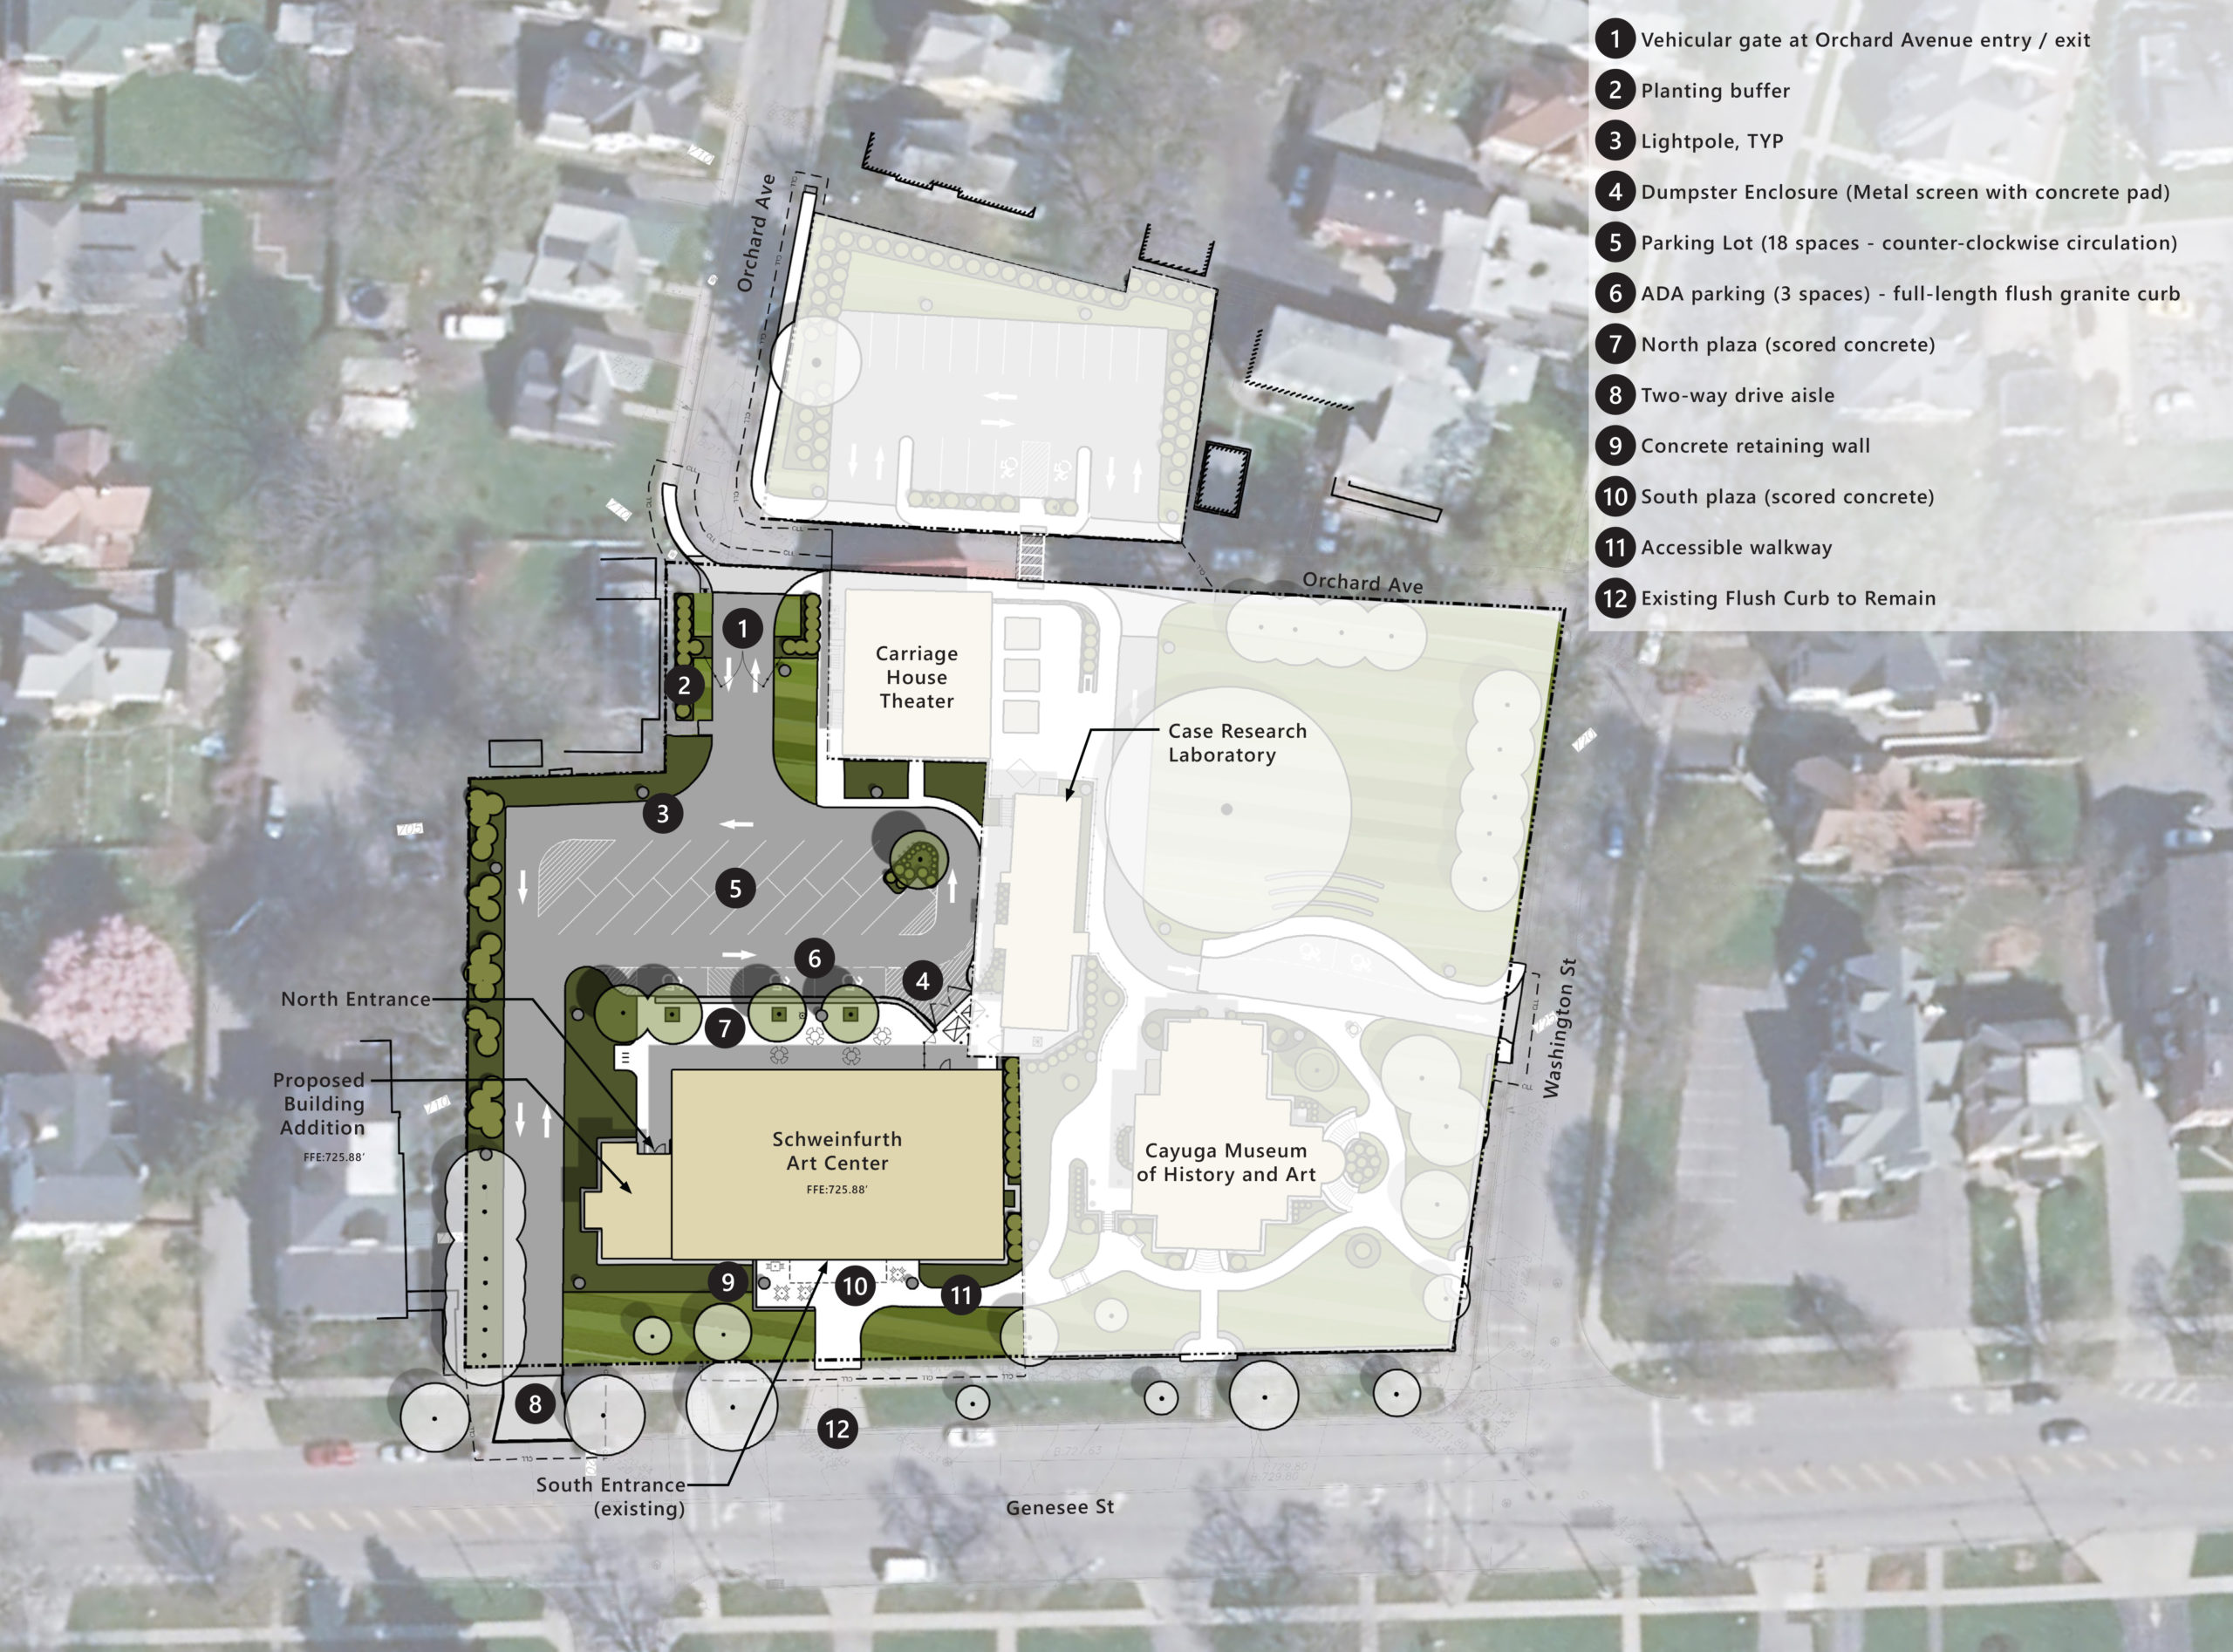 A schematic of plans for the Schweinfurth Art Center, showing an addition, a restructured parking lot, and walkways between Schweinfurth and Cayuga Museum